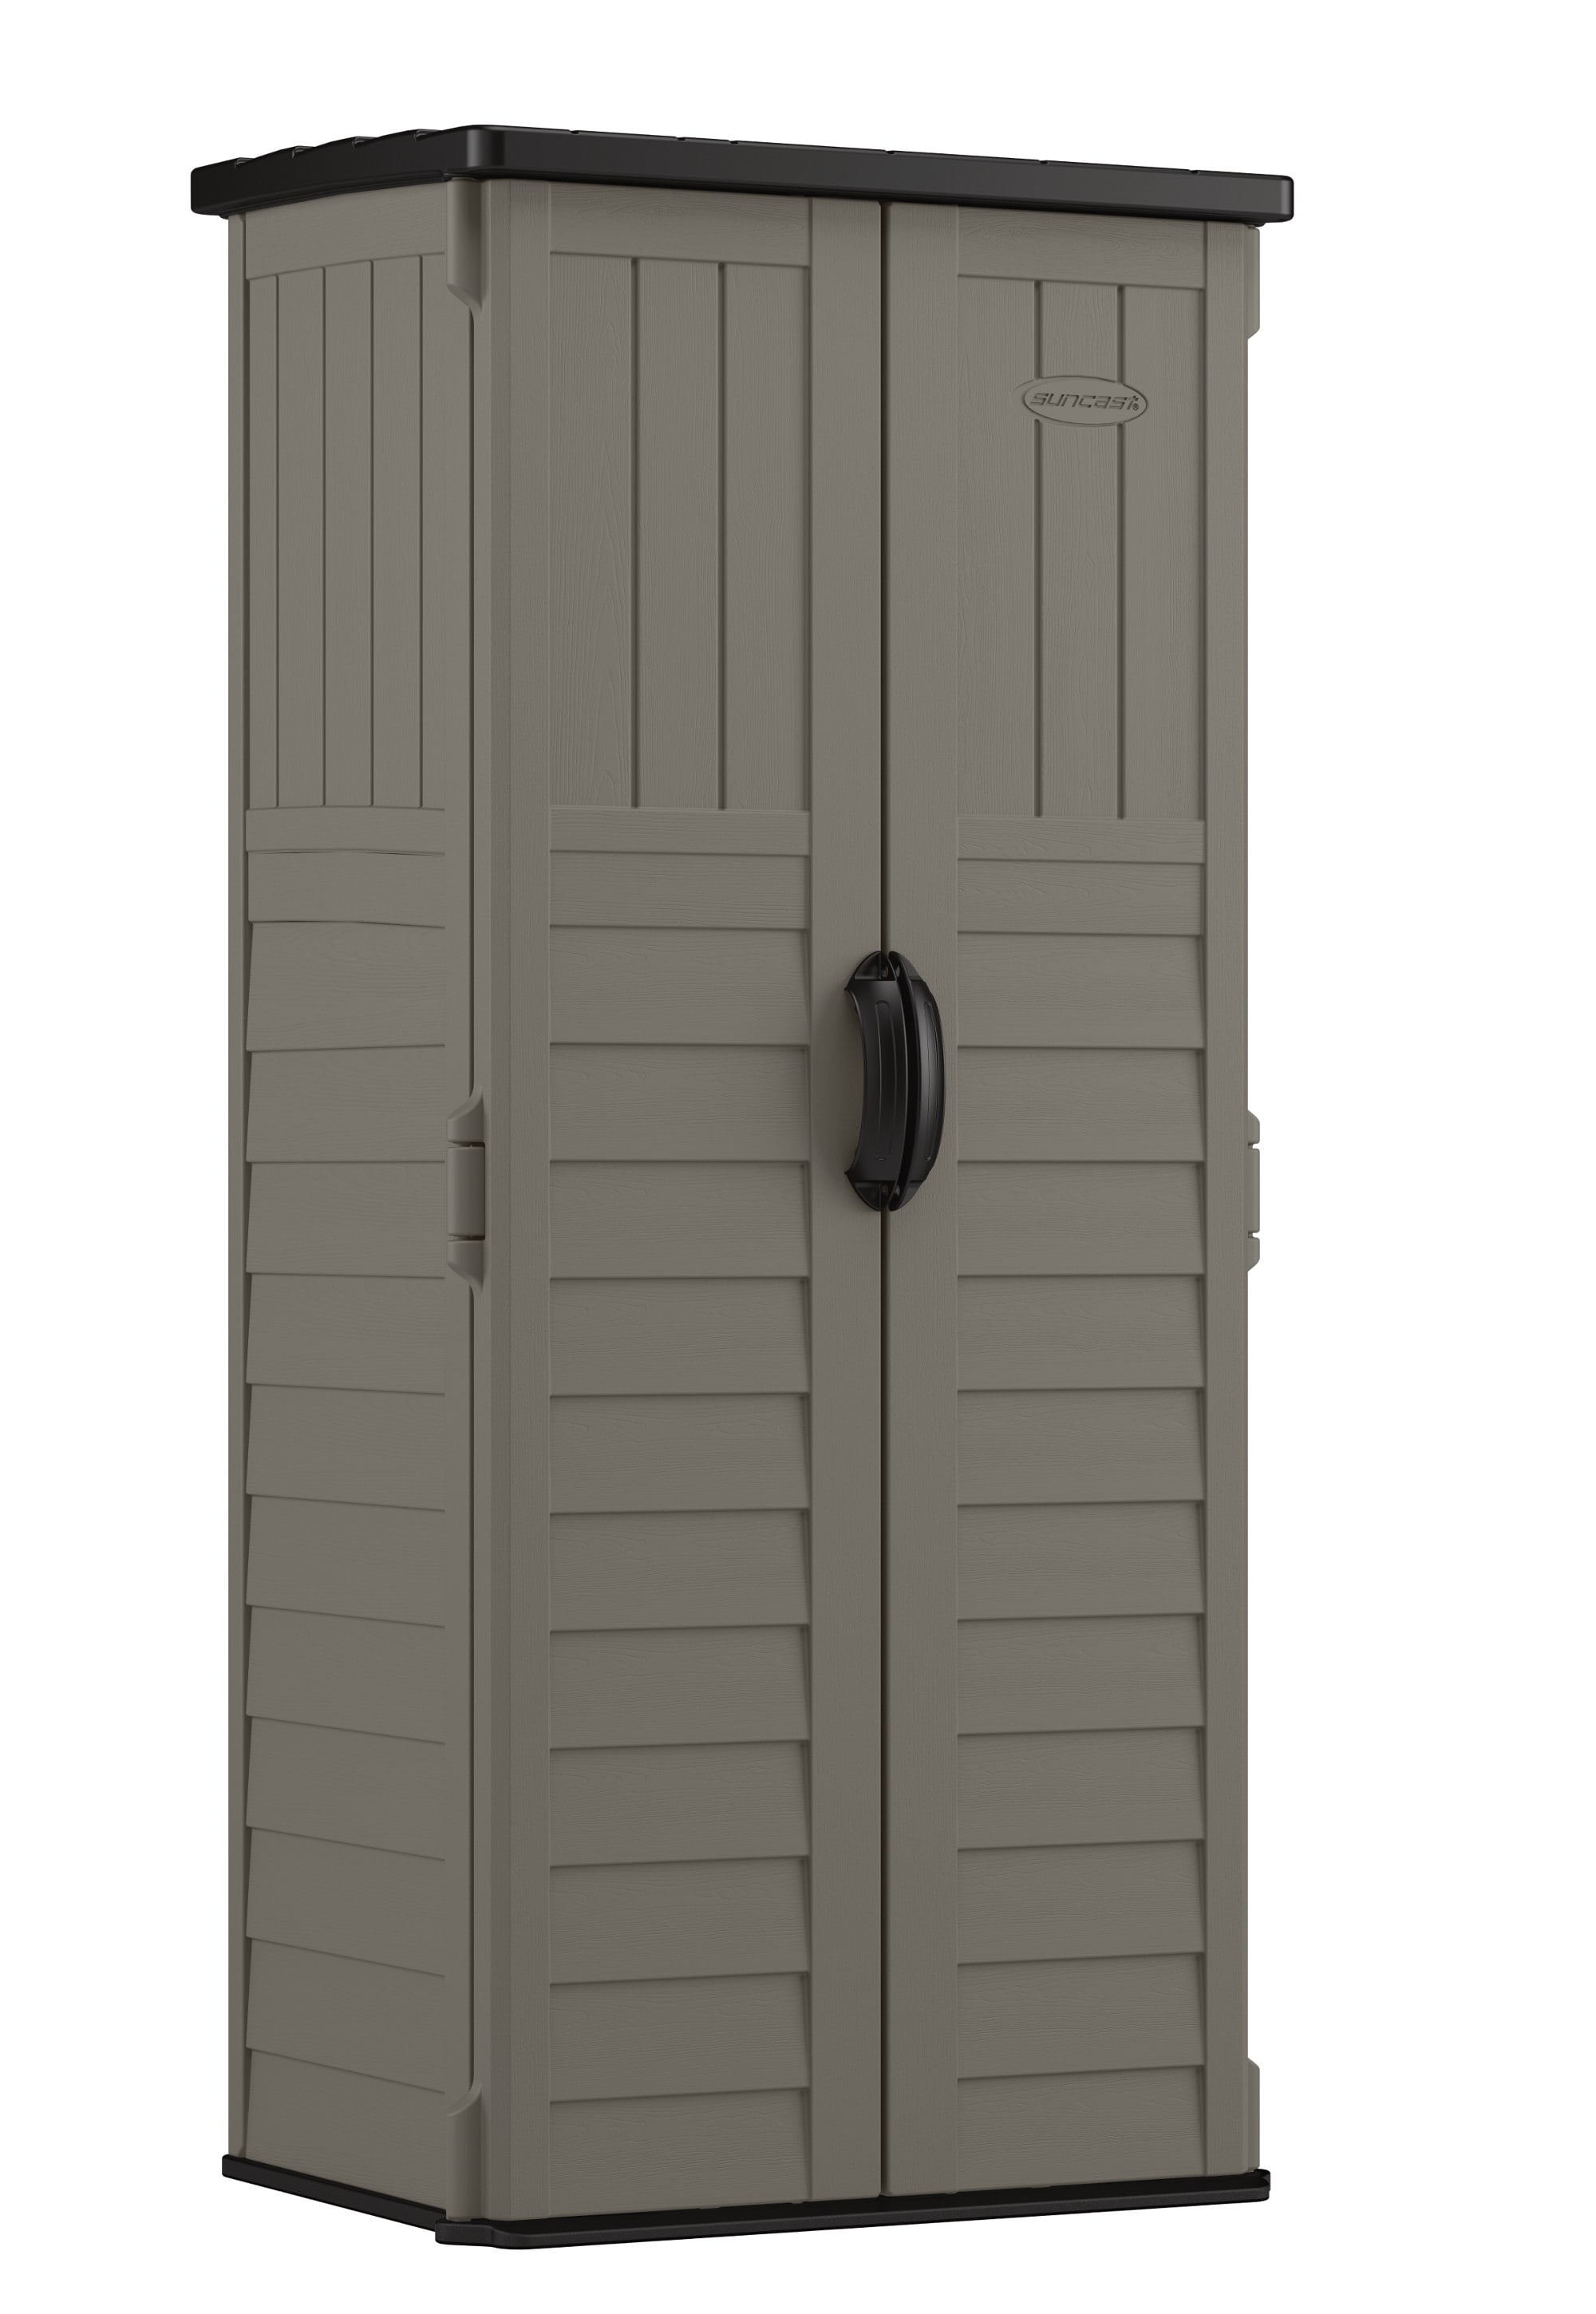 2 ft. x 2 ft. Vertical Storage Shed